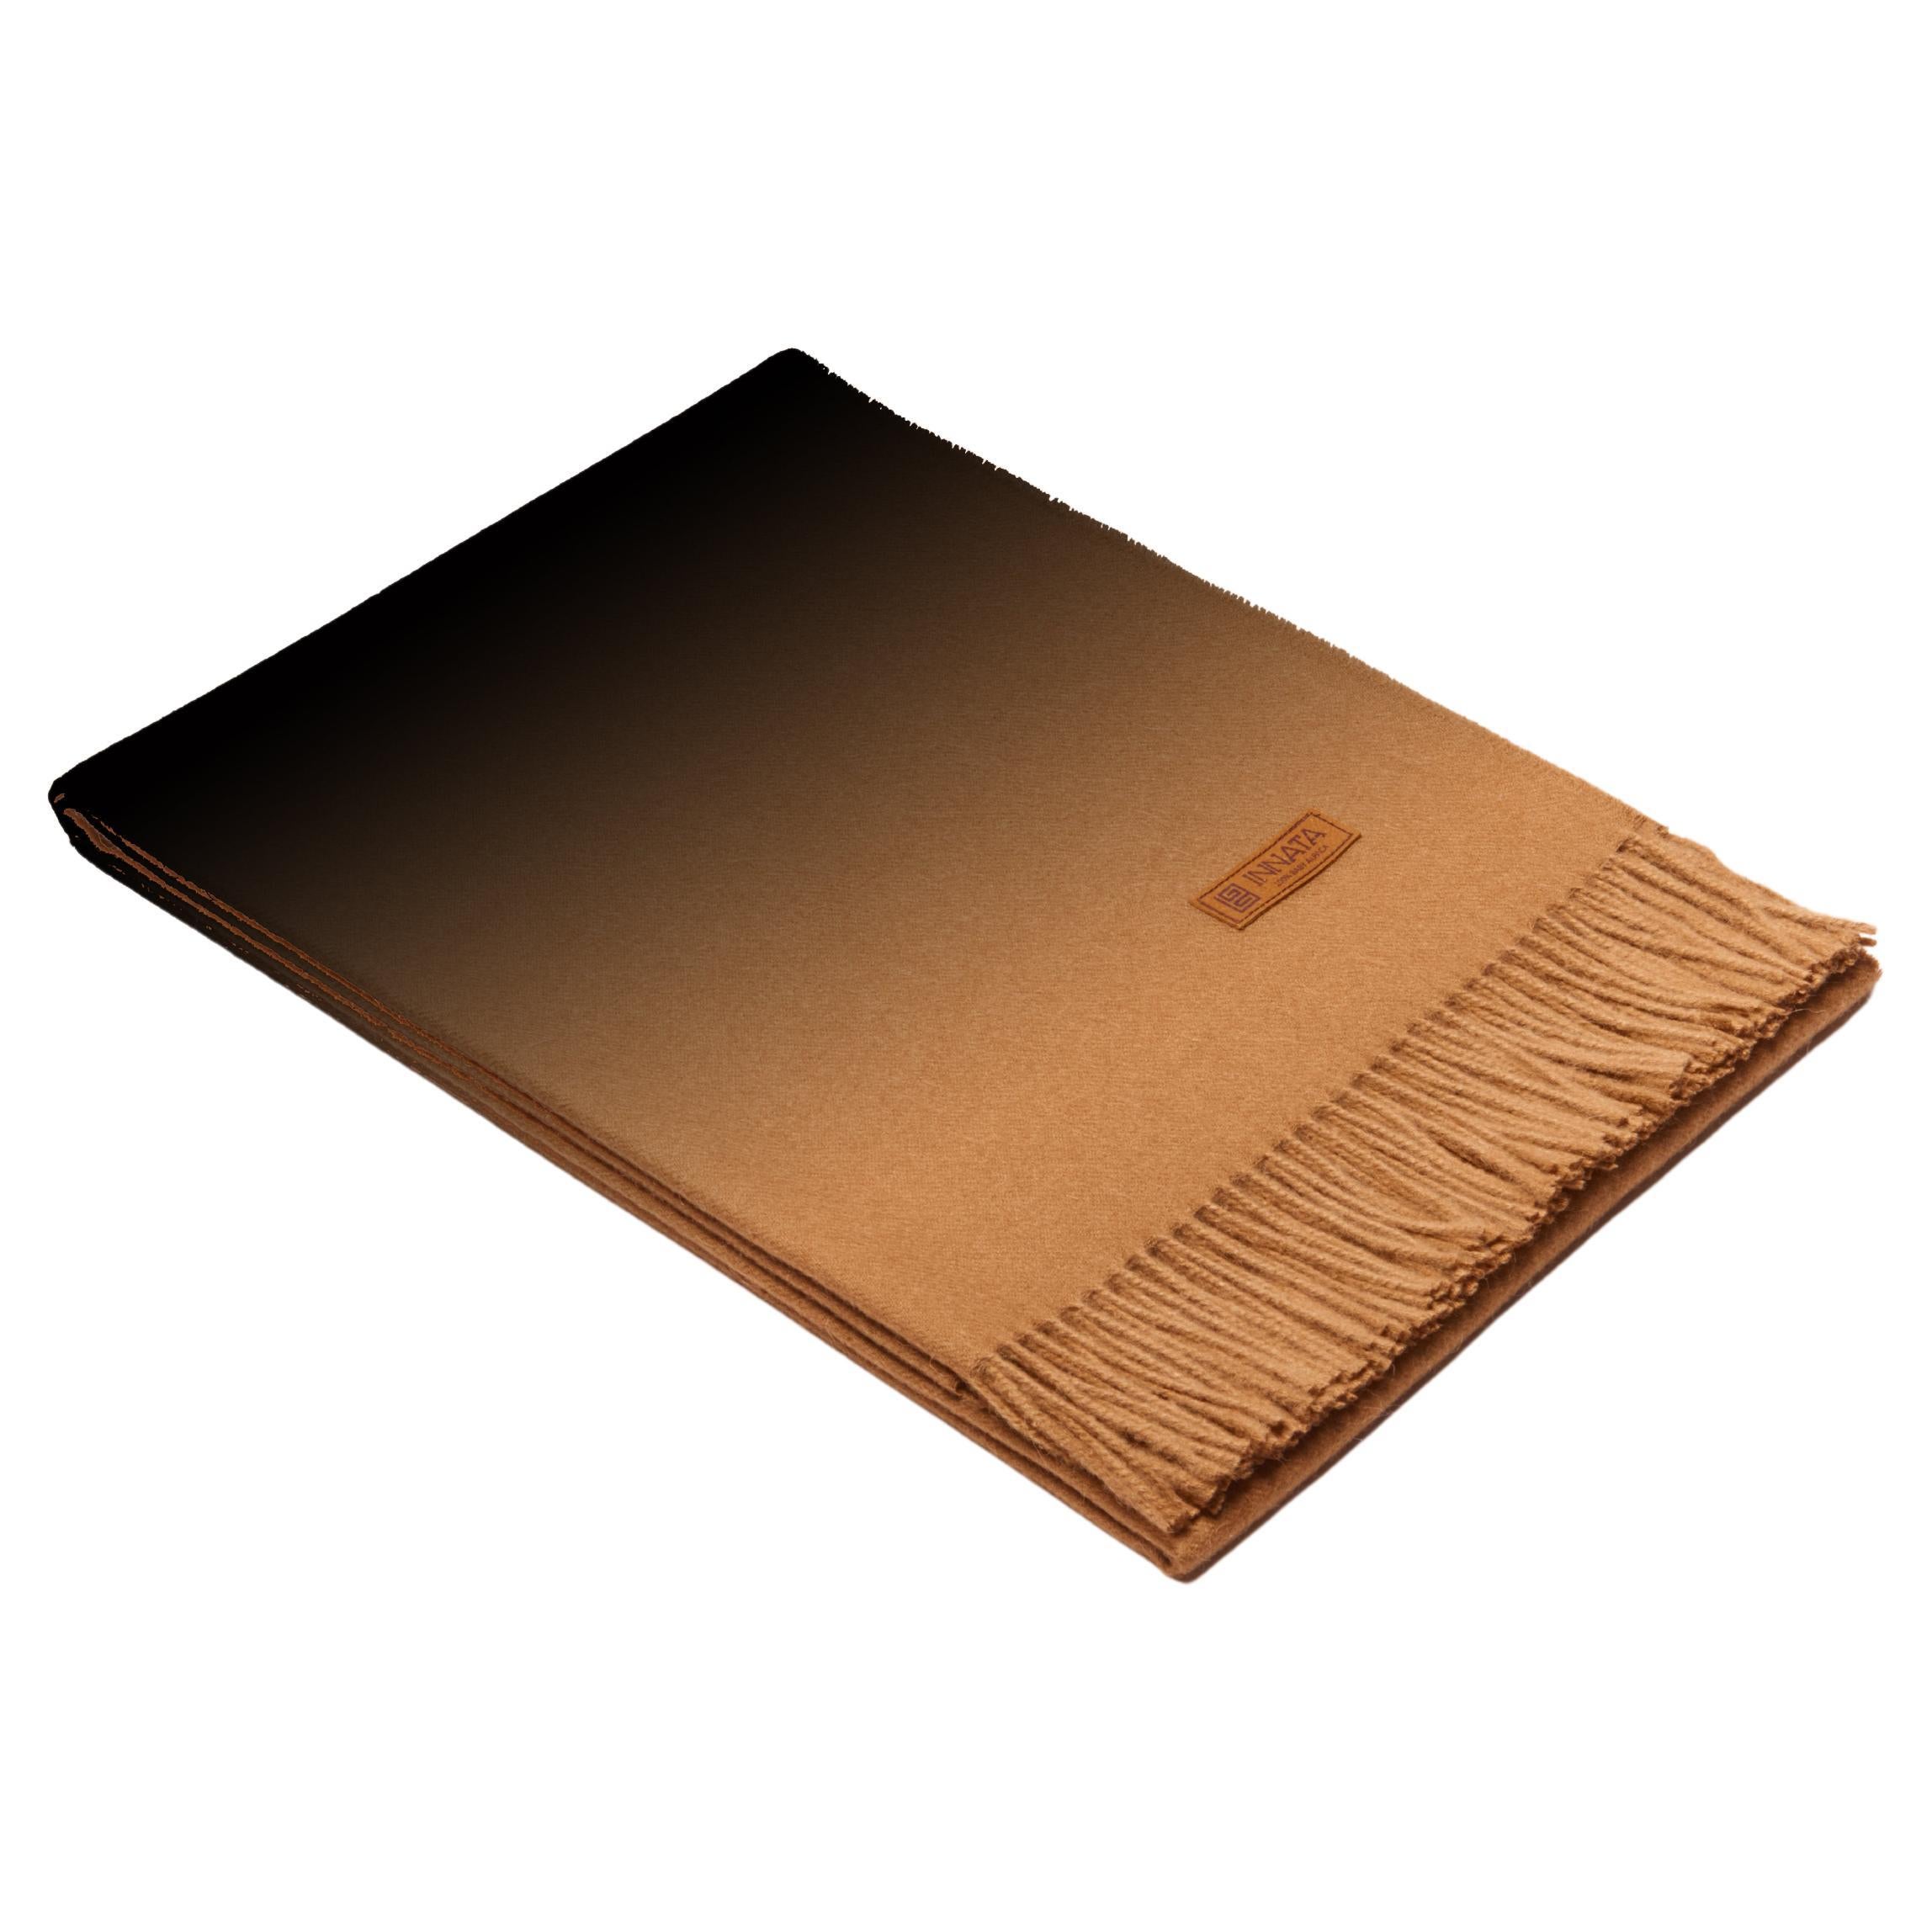 Hand-Dyed Peruvian Luxury Baby Alpaca Wool Throw in Camel with Black Tint